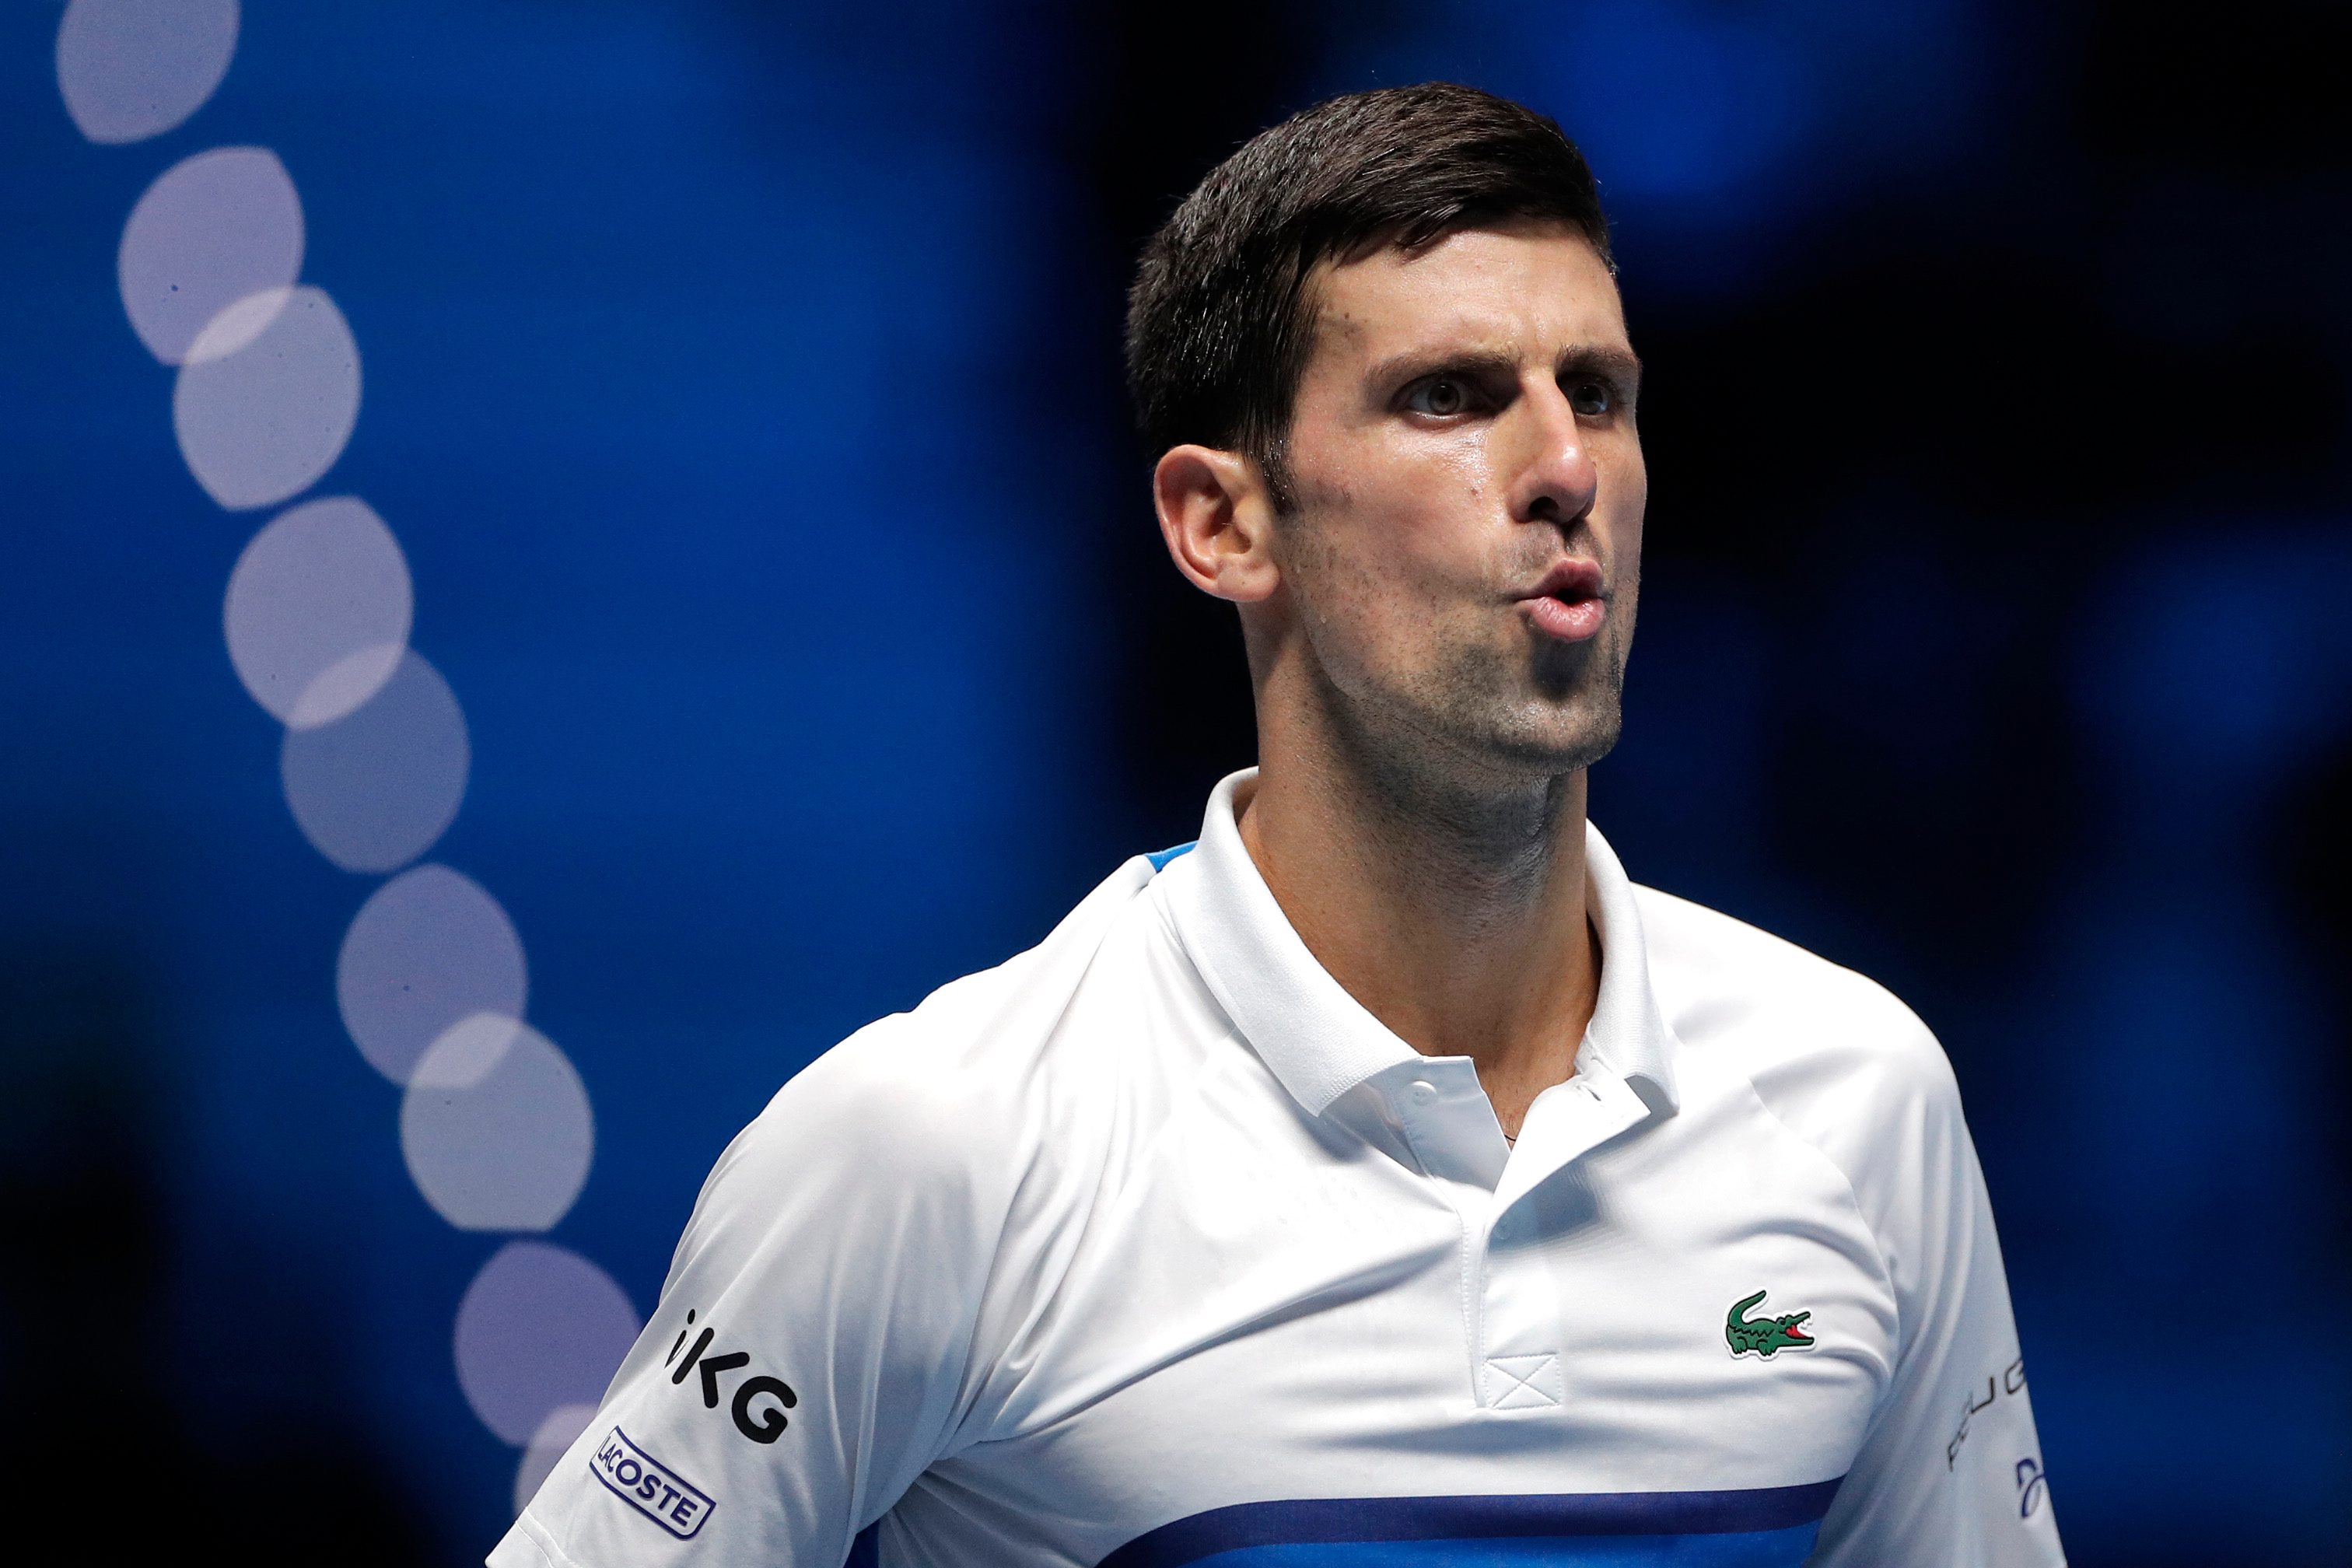 Djokovic remains non-committal about Australian Open participation